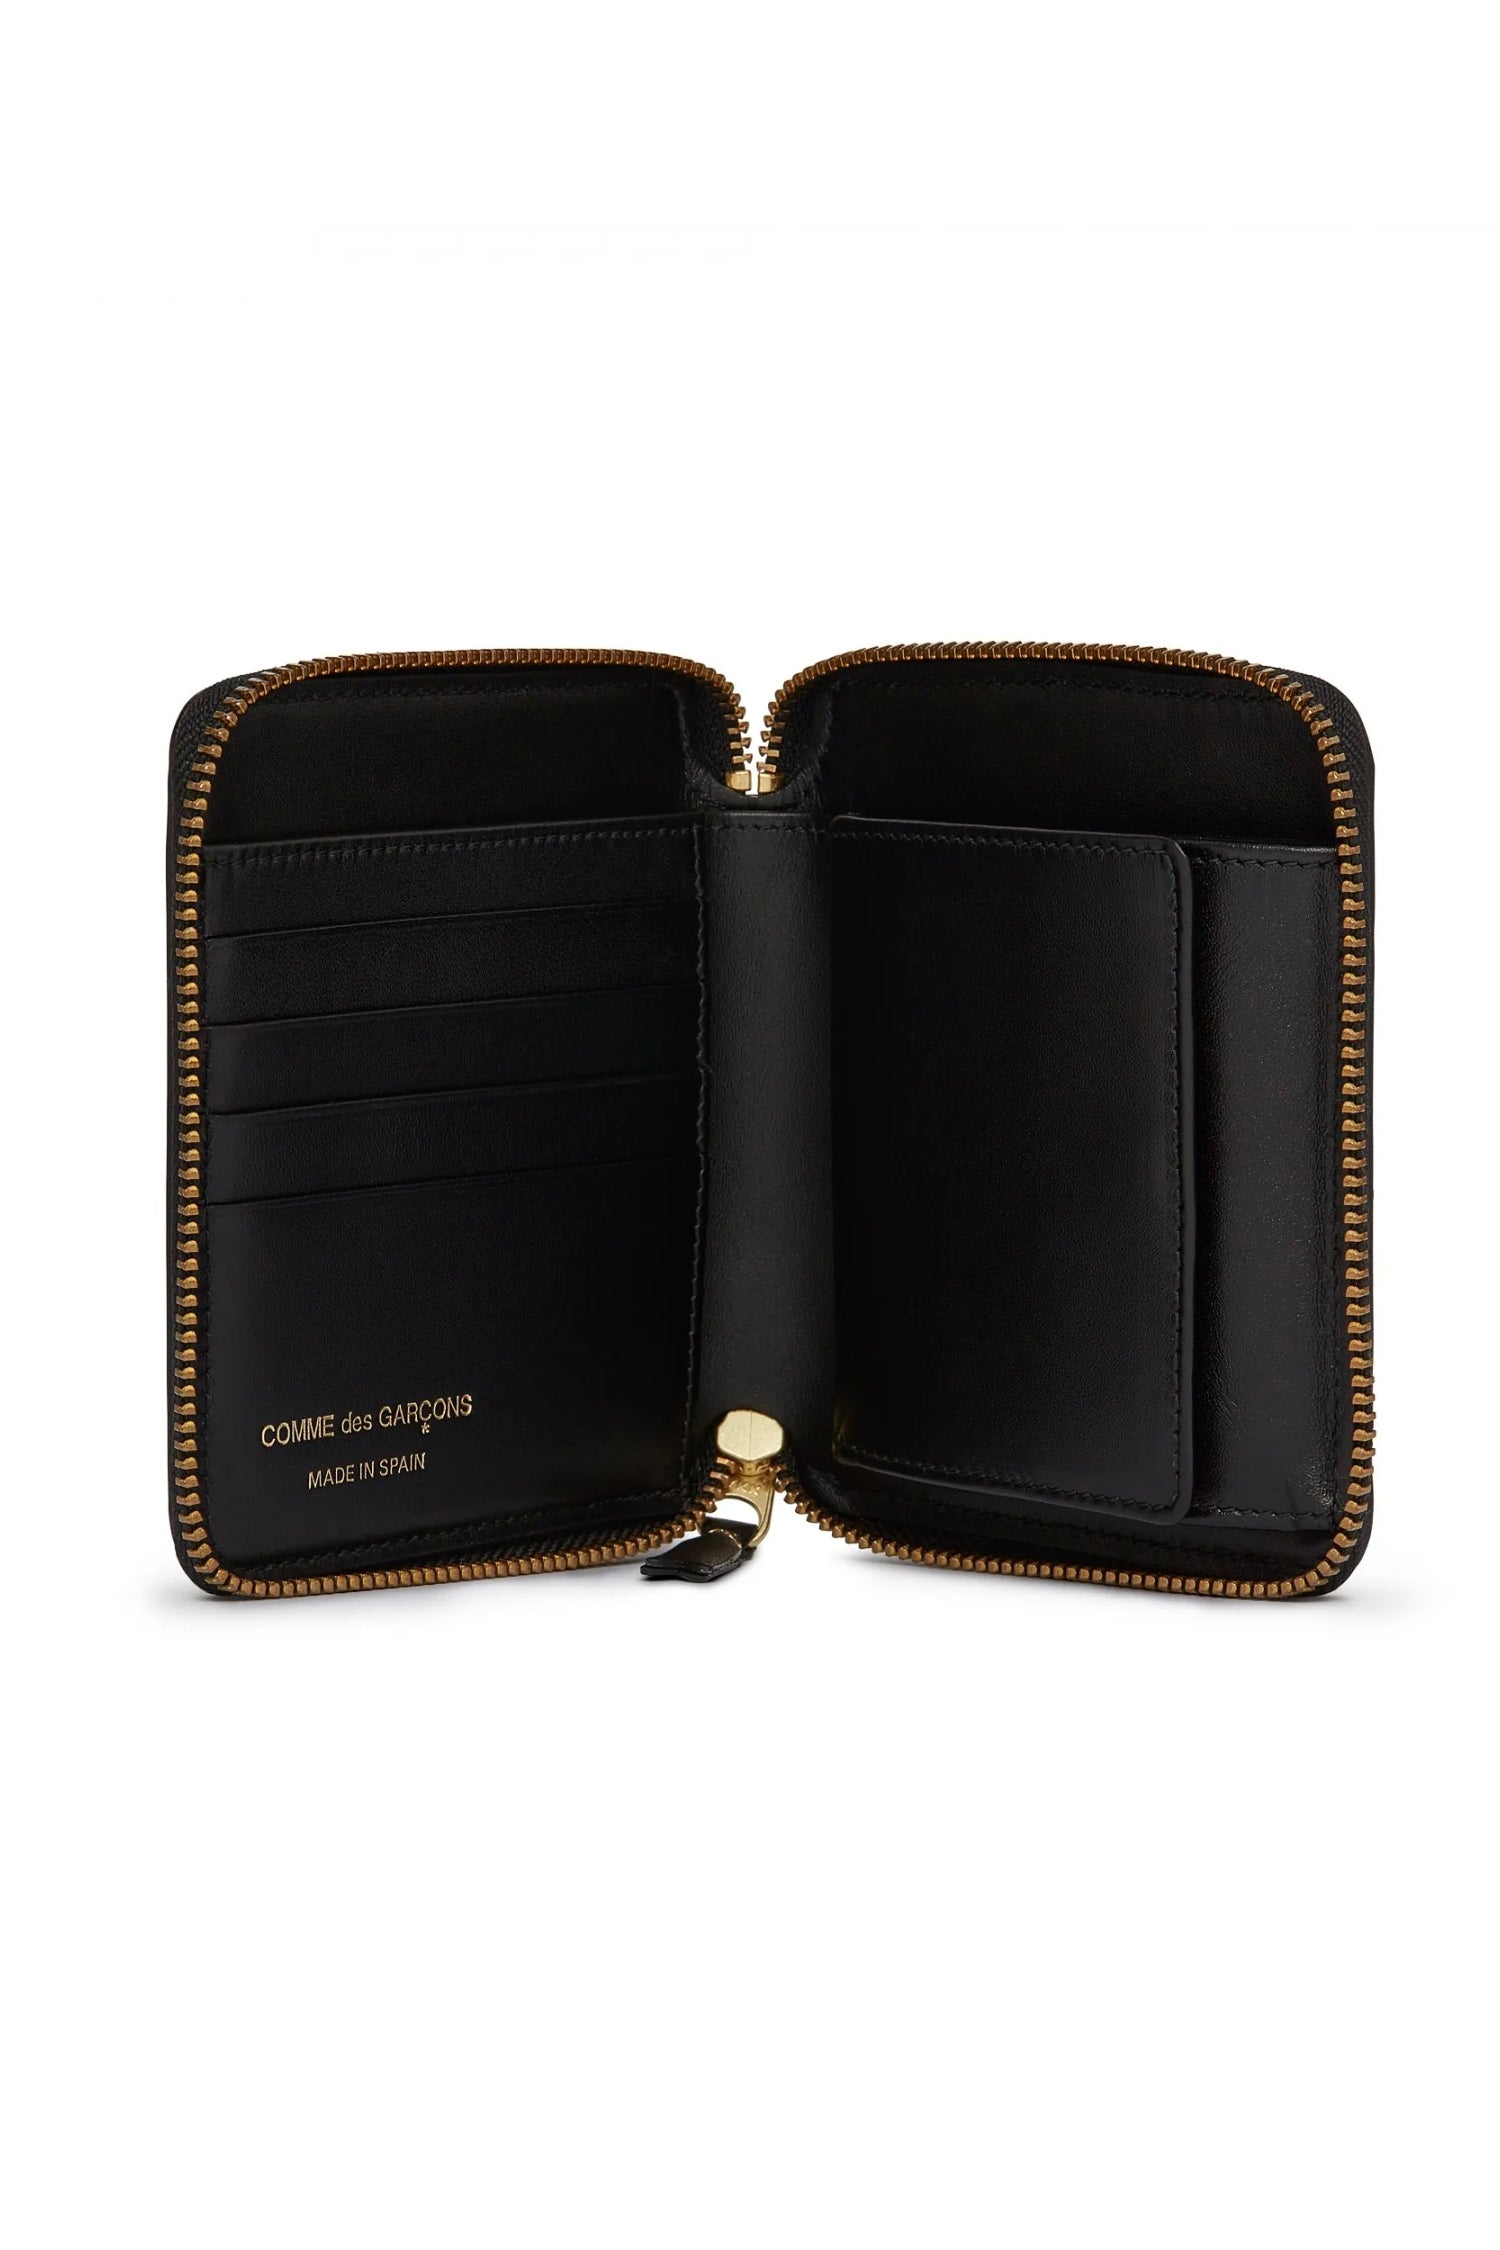 CLASSIC GROUP WALLET IN BLACK, W24